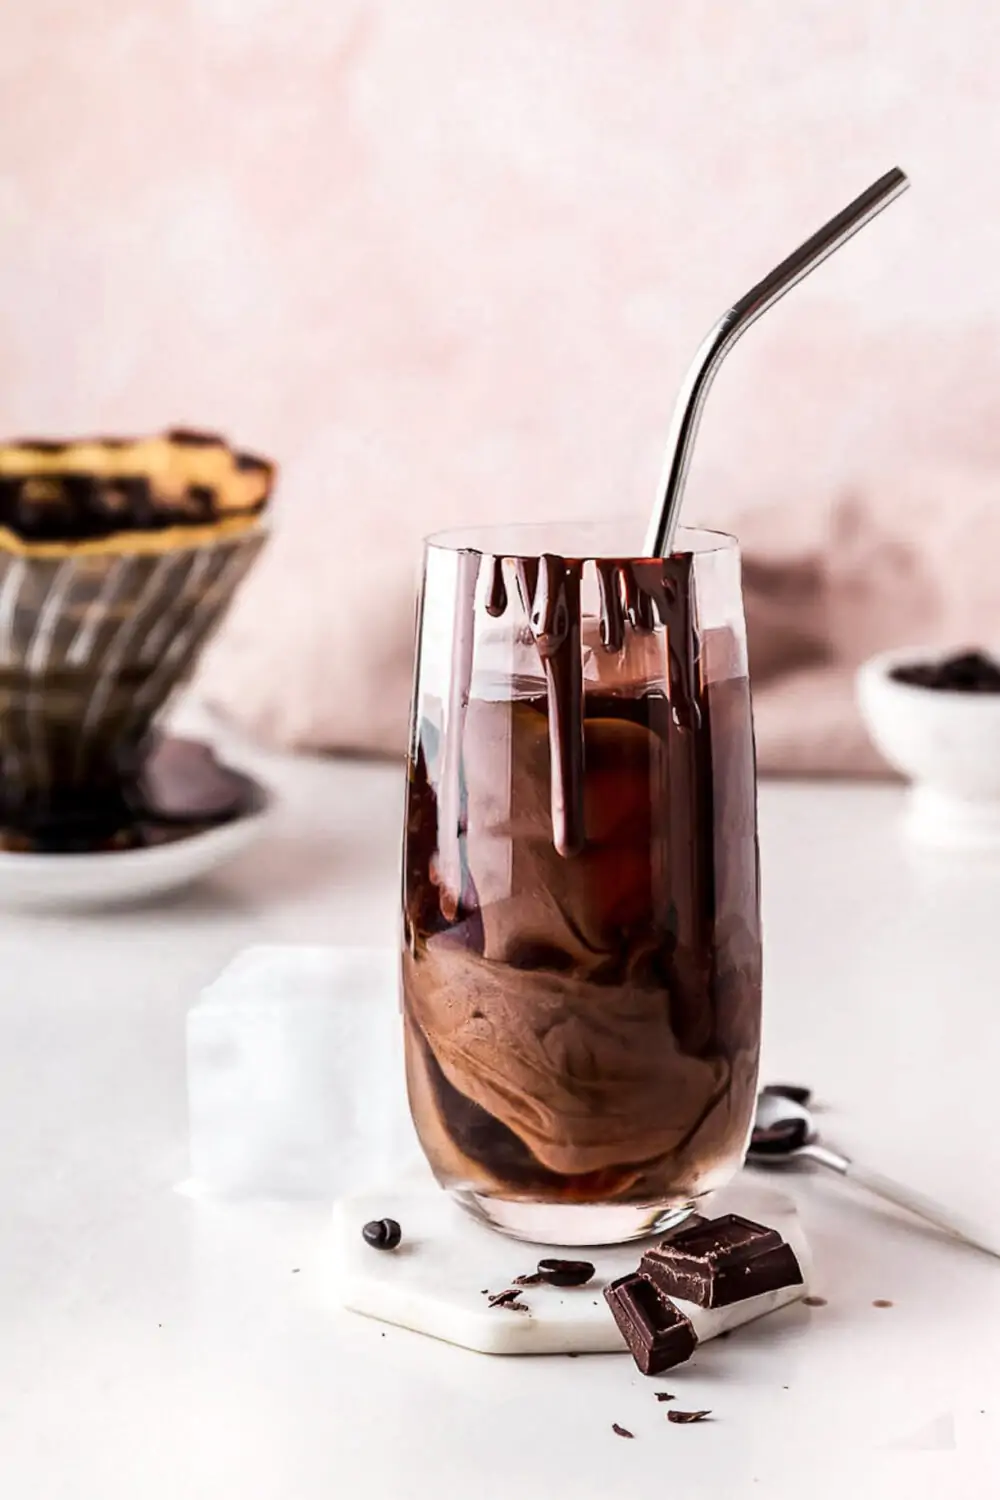 COLD BREW ICED MOCHA IN GLASS WITH STAINLESS STEEL STRAW